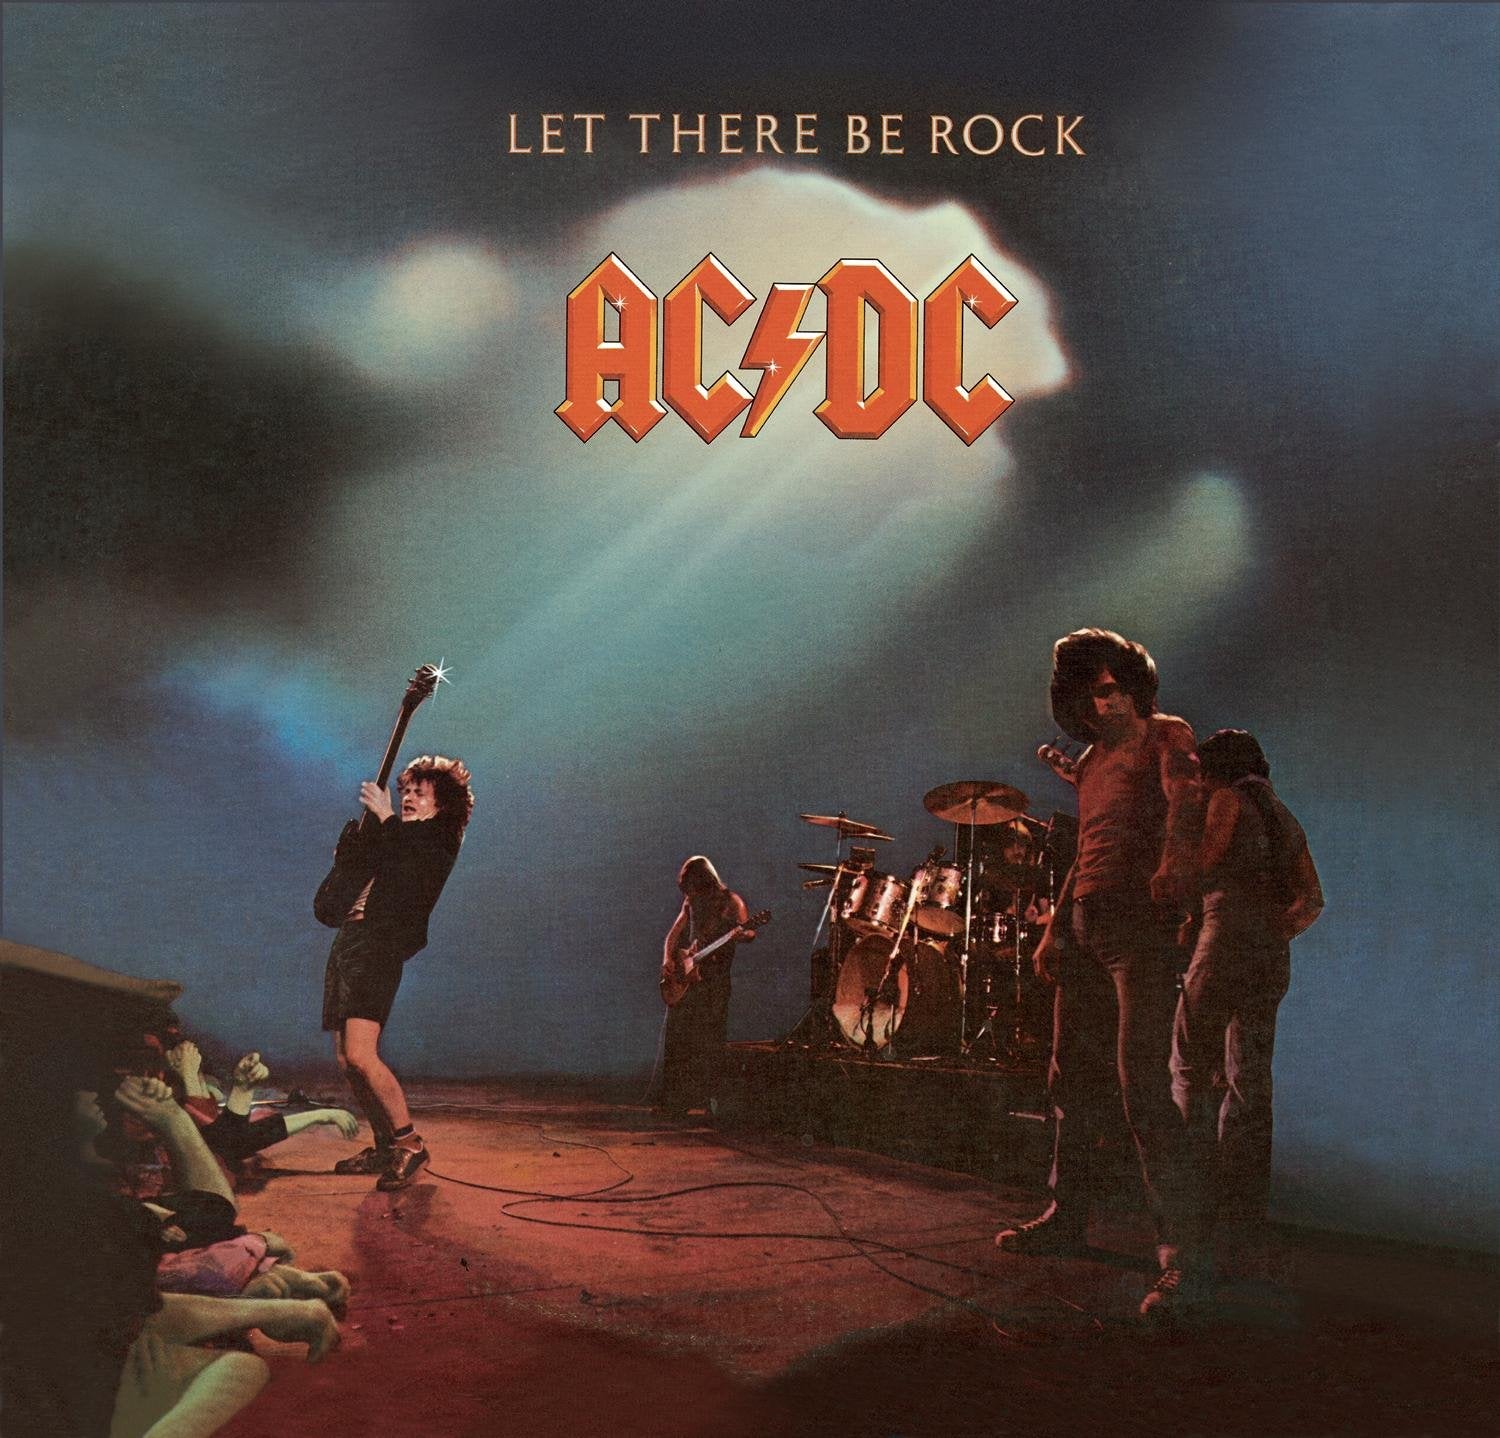 Let there be rock CD